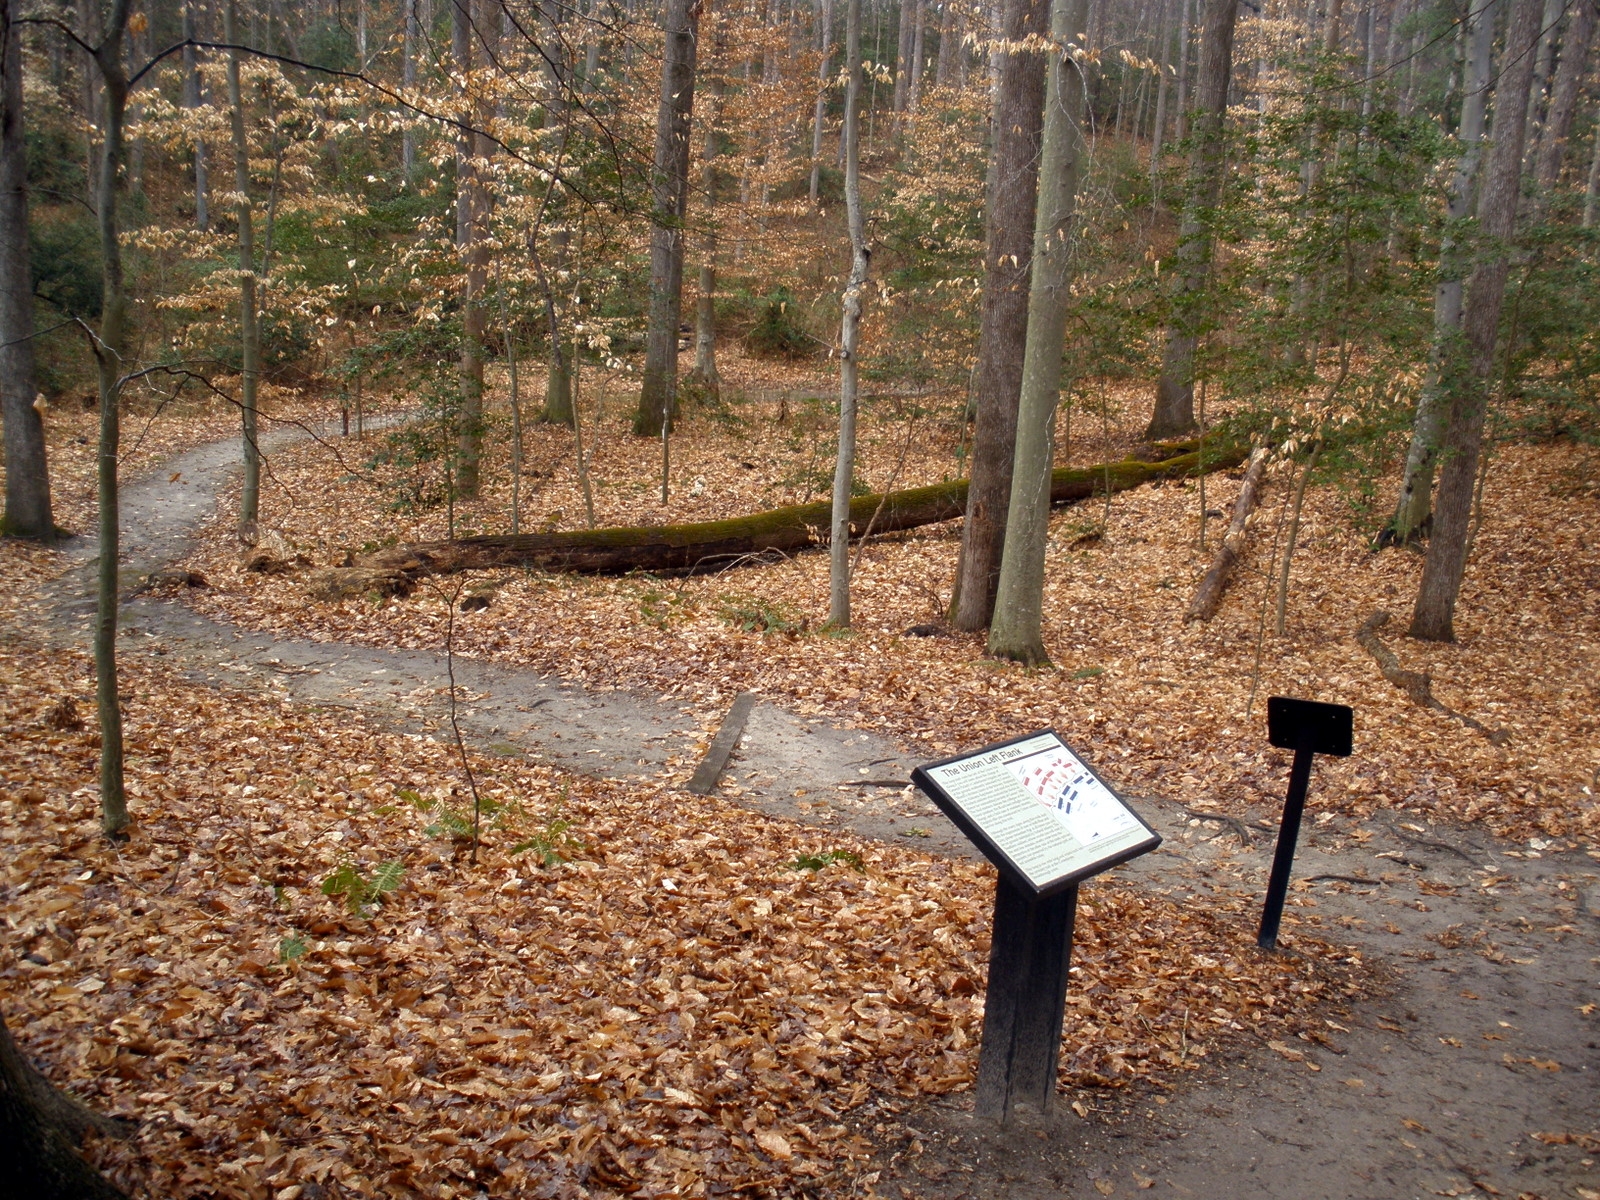 The Union Left Flank Marker